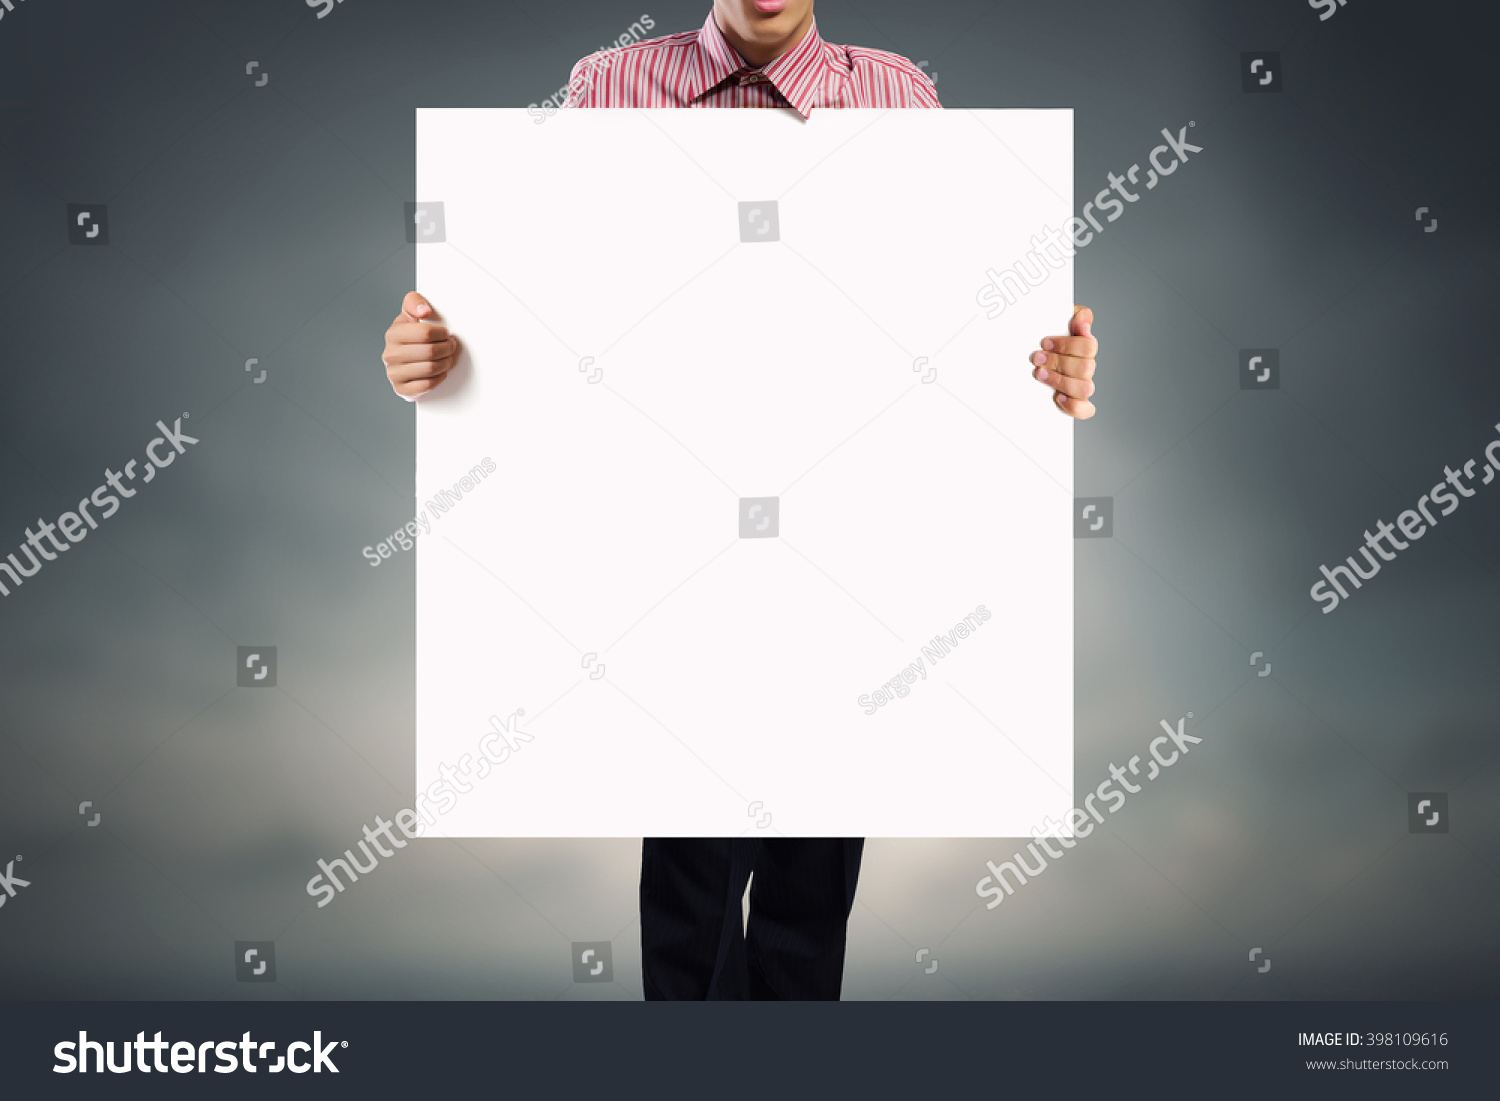 Man with empty banner #398109616